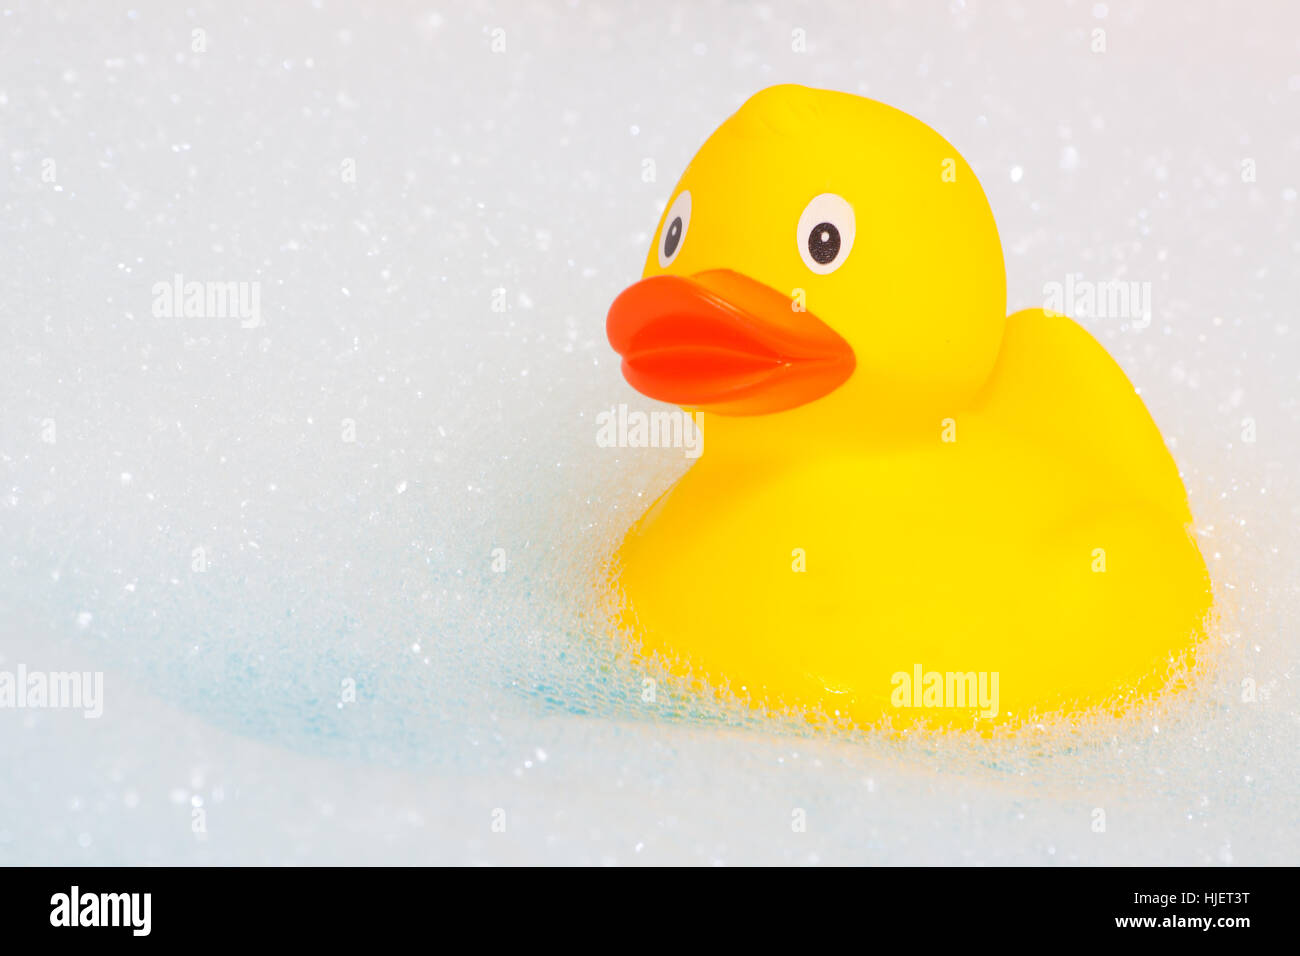 toy, plastic, synthetic material, bathwater, lather, bath foam, rubber duck, Stock Photo